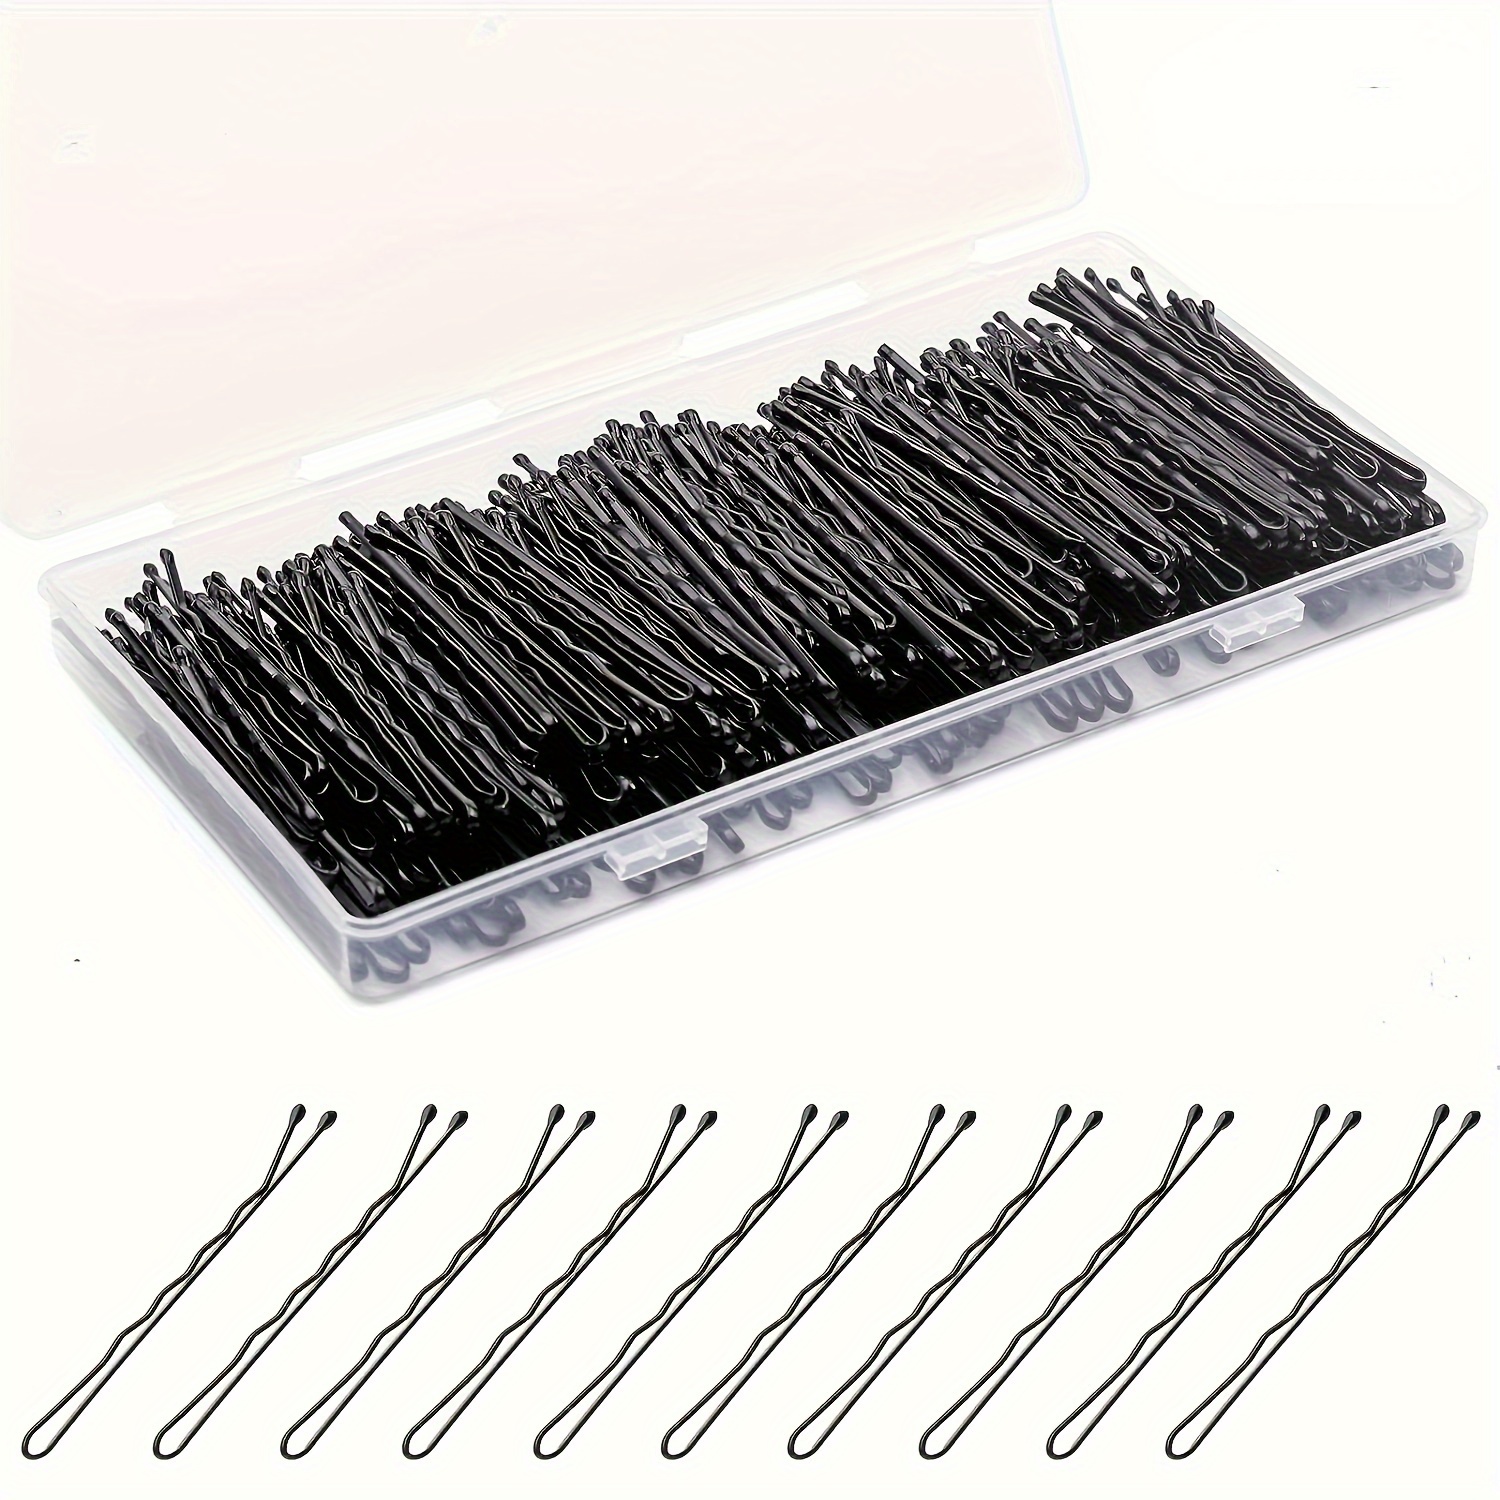 Magnetic Bobby Pin Holder - Hold Metal Bobby Pins and Clips in